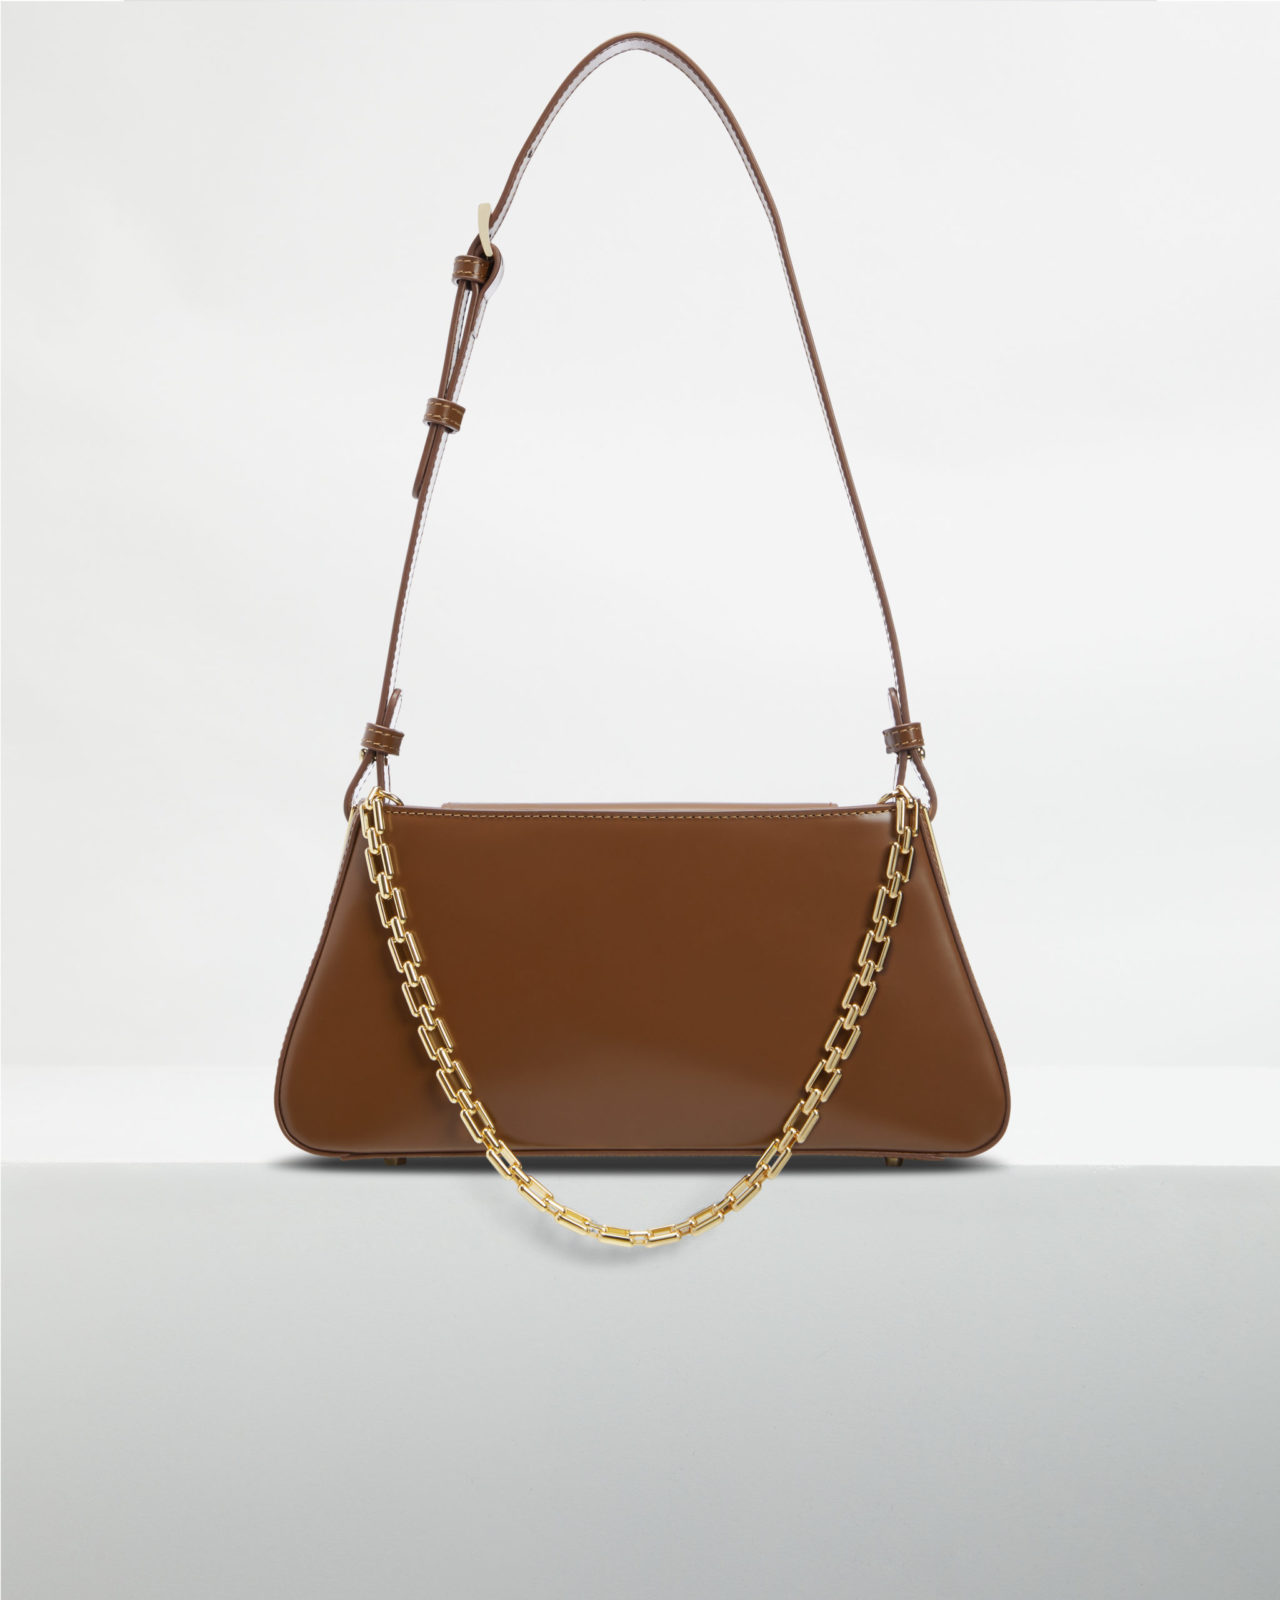 An elevated eCommerce handbag product image captured by I Heart Studios.